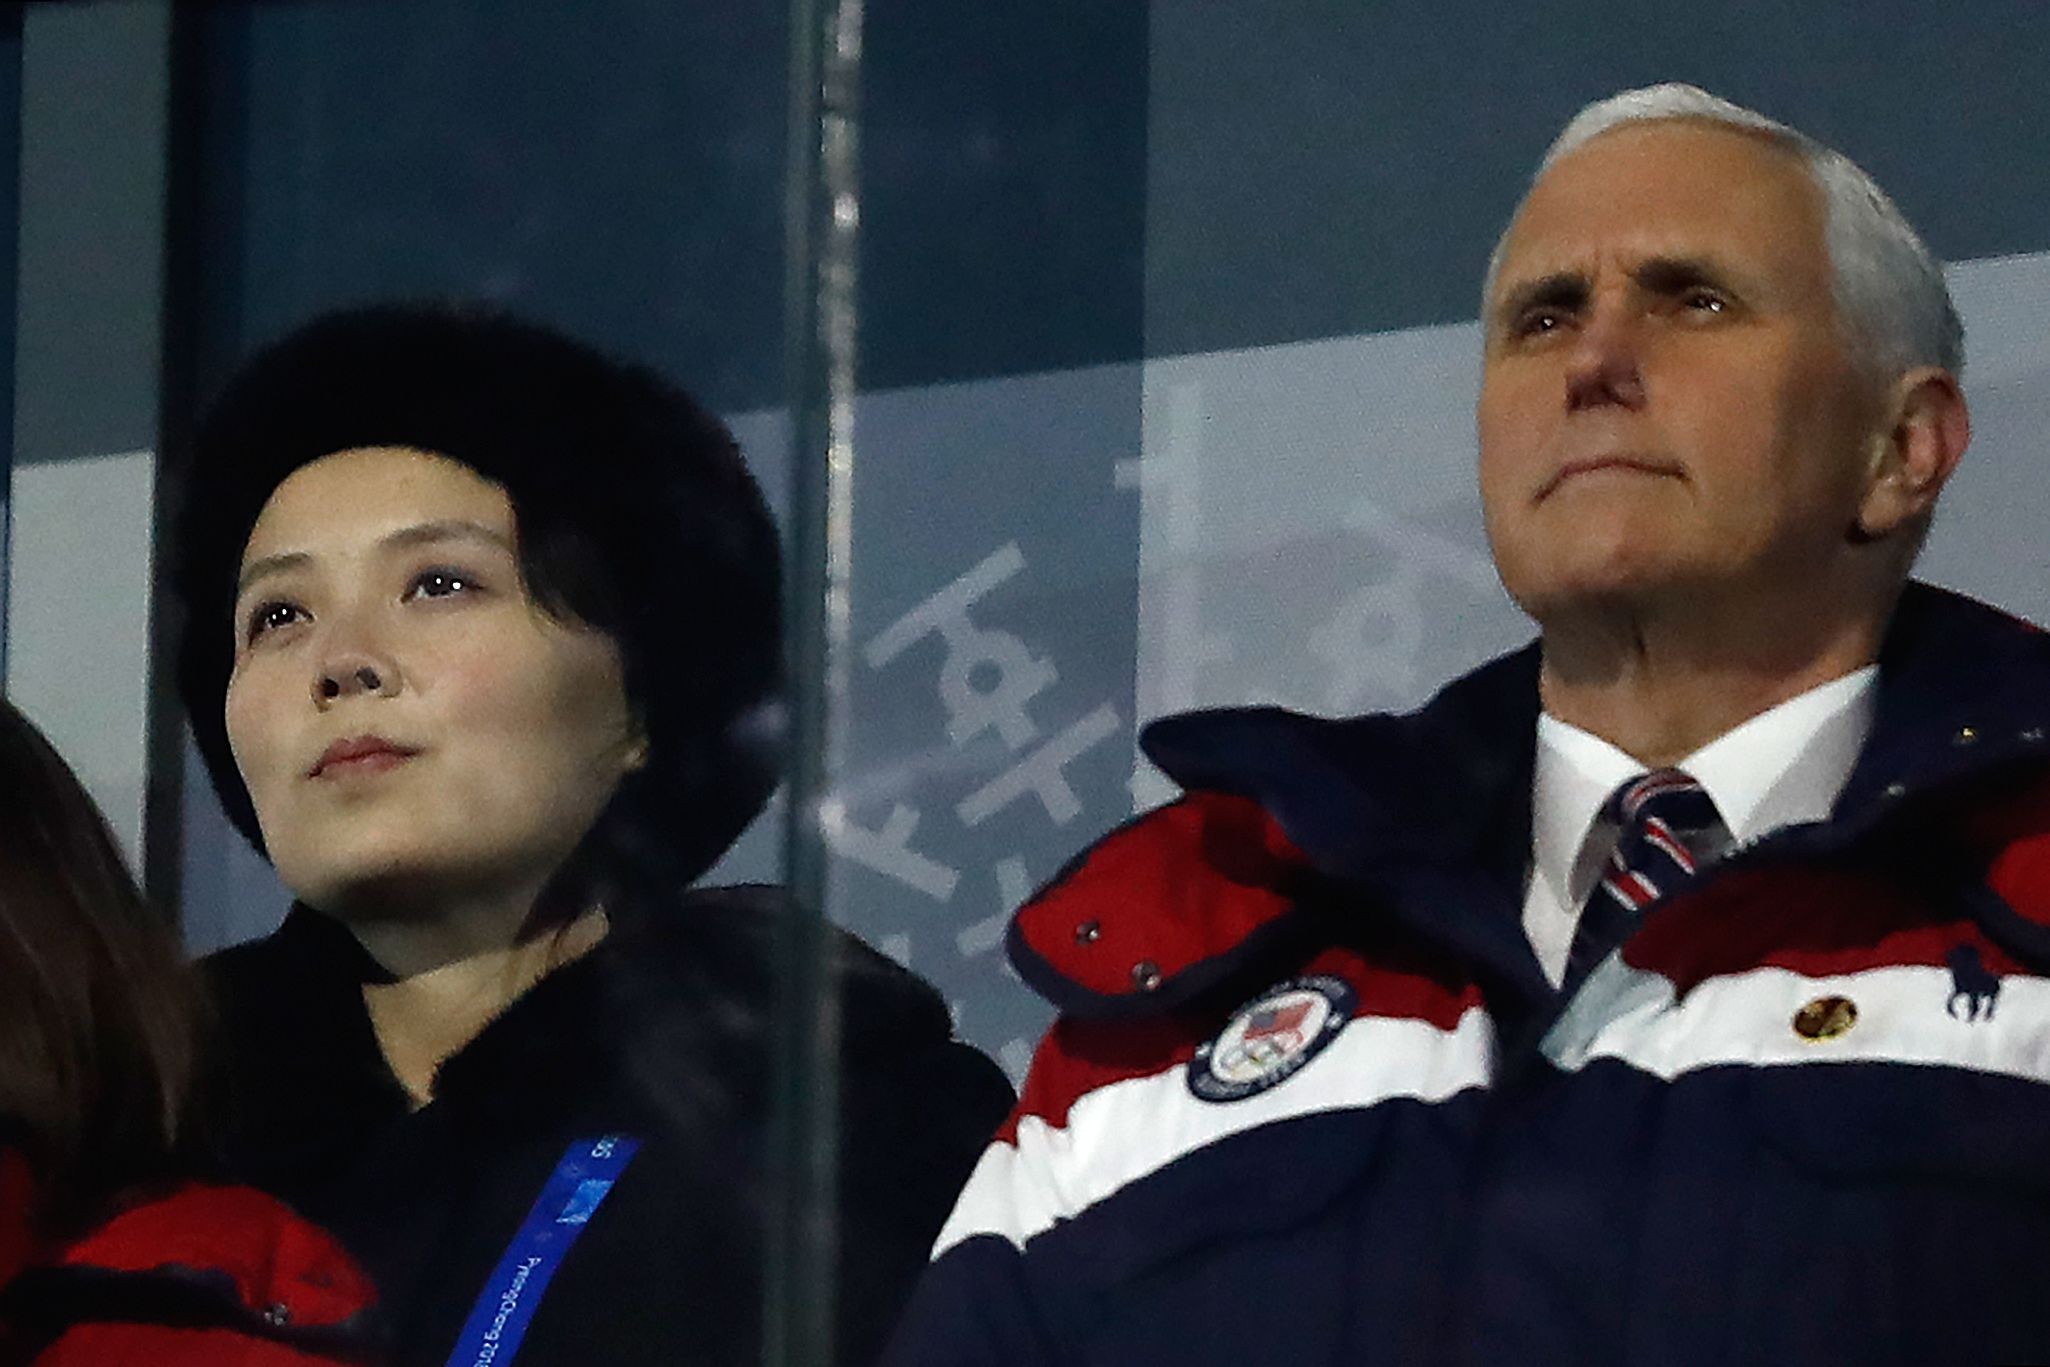 US Vice President Mike Pence (right) and North Korea's Kim Jong Un's sister, Kim Yo Jong, attend the opening ceremony of the Pyeongchang 2018 Winter Olympic Games at the Pyeongchang Stadium. Photo: AFP